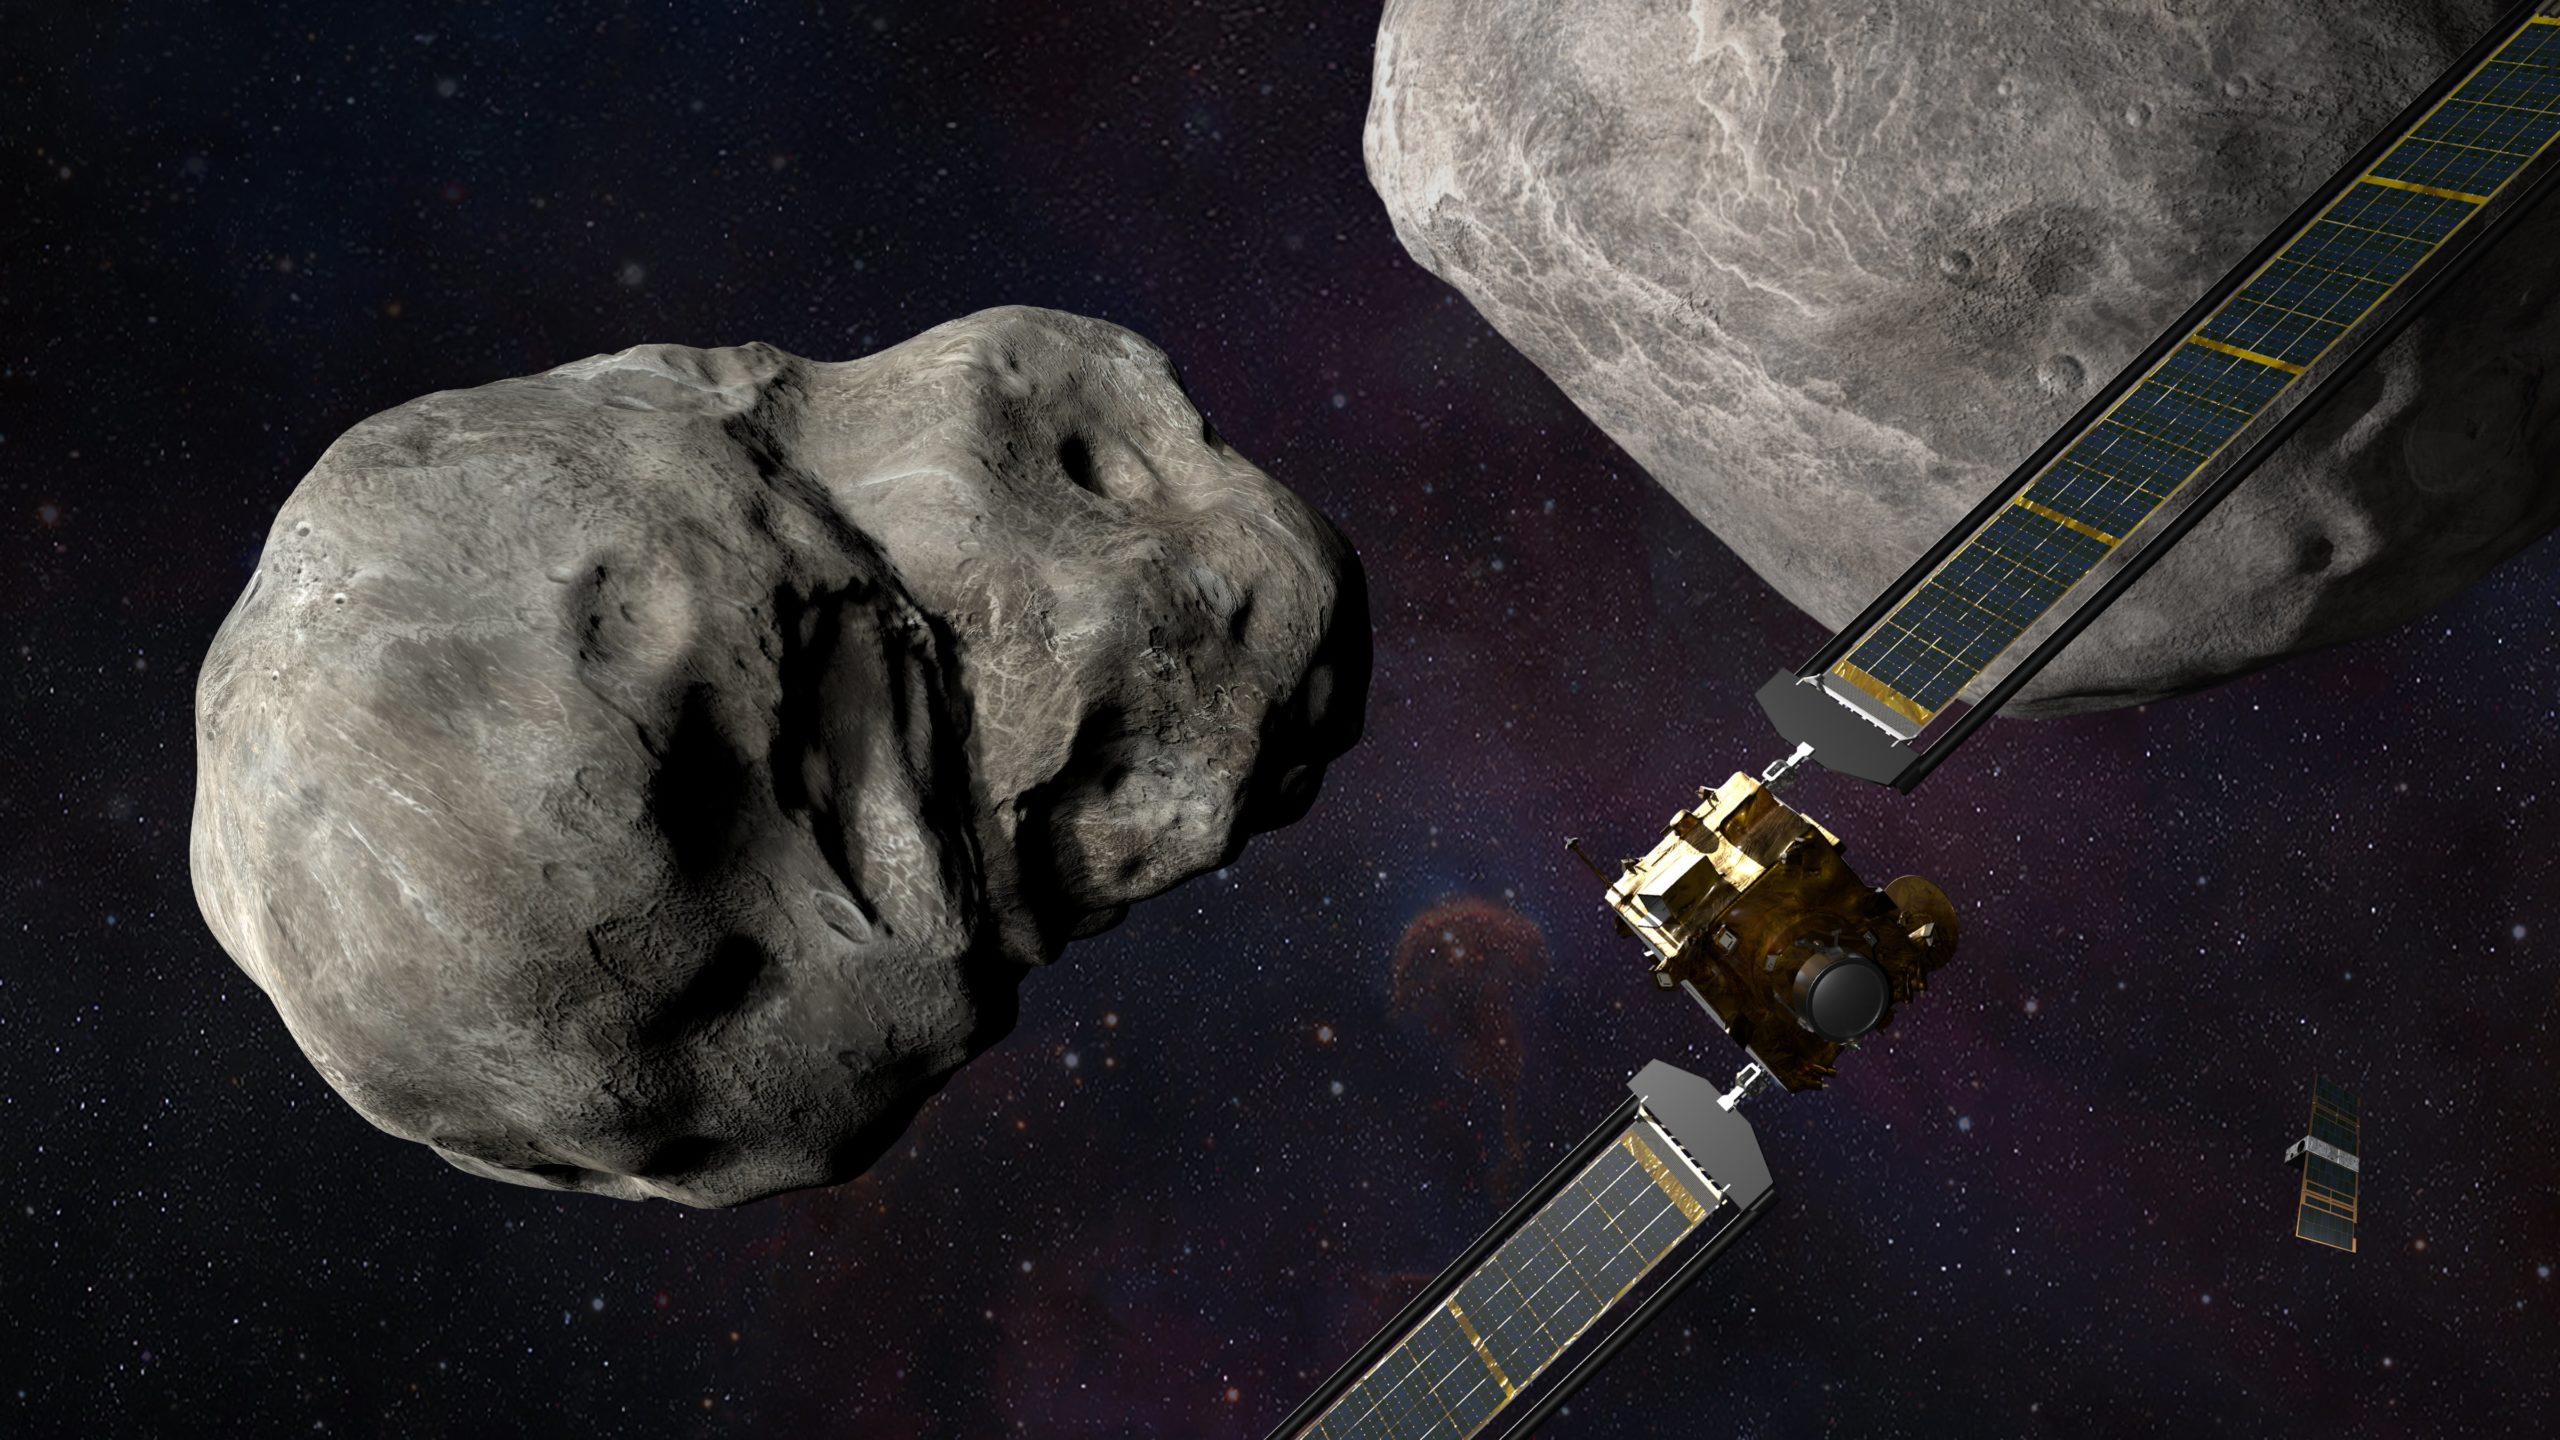 NASA’s Asteroid Detector Was Upgraded to Scan the Entire Sky Every Day